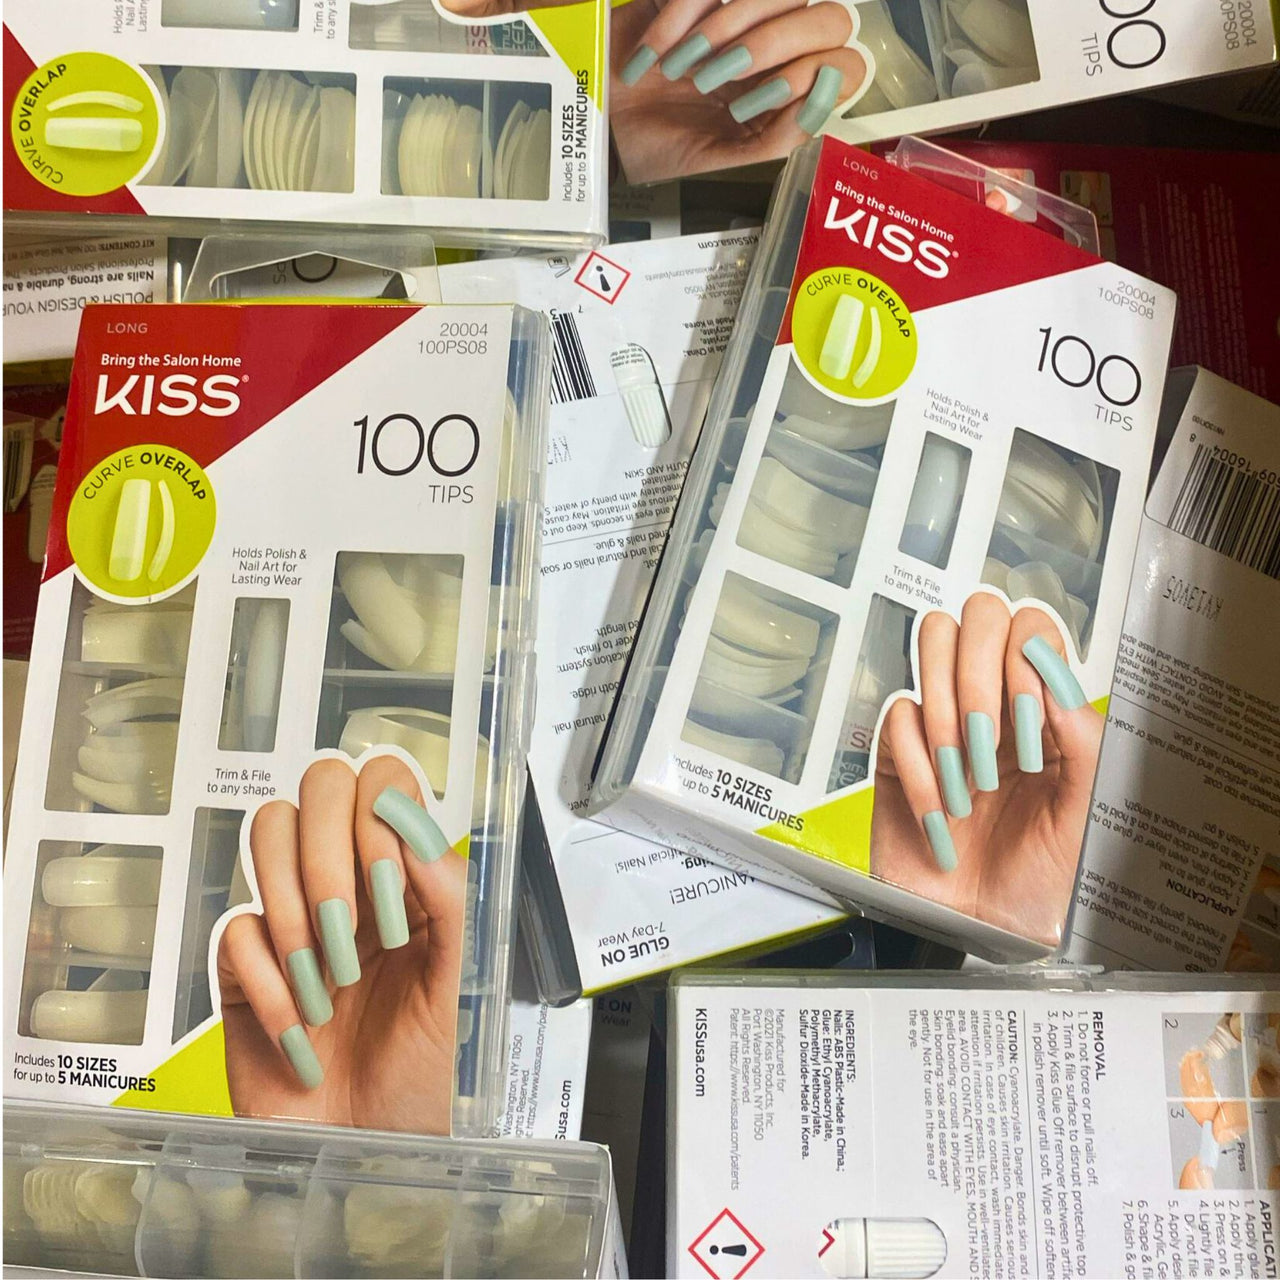 Kiss Bring The Salon Home 100 Tips Includes 10 sizes 